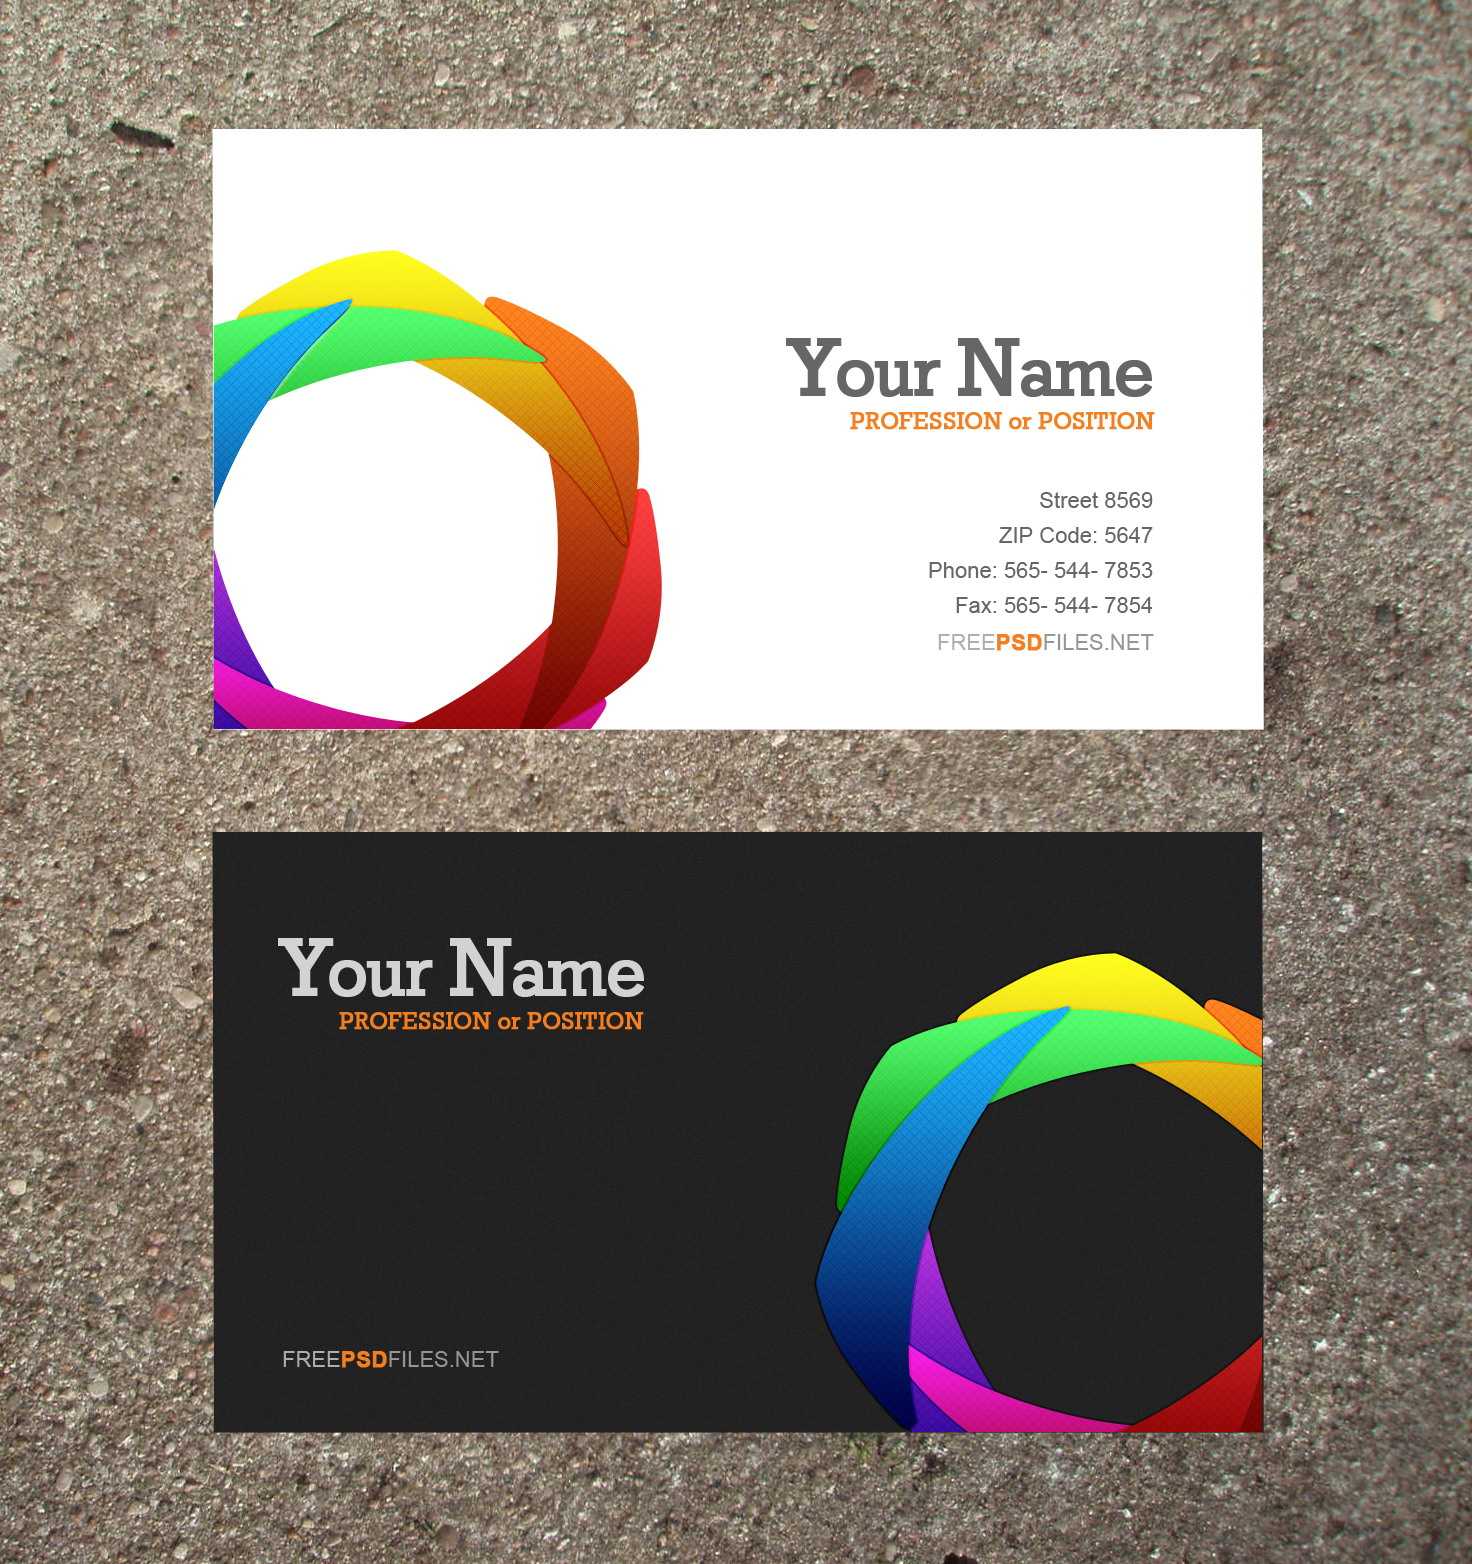 free business cards templates download